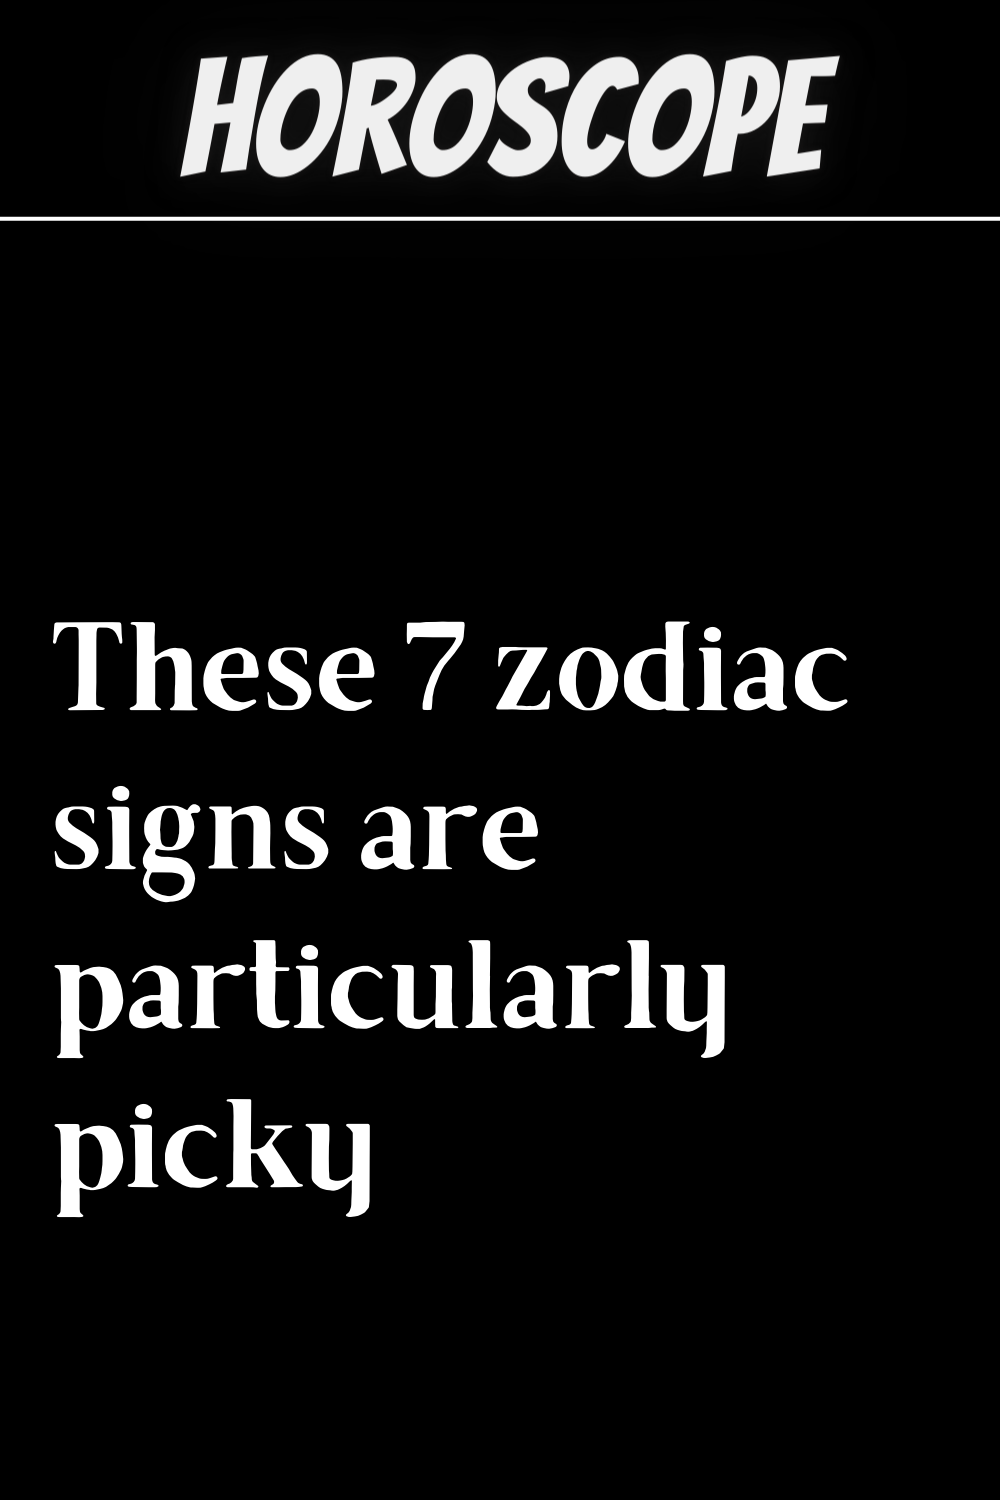 These 7 zodiac signs are particularly picky